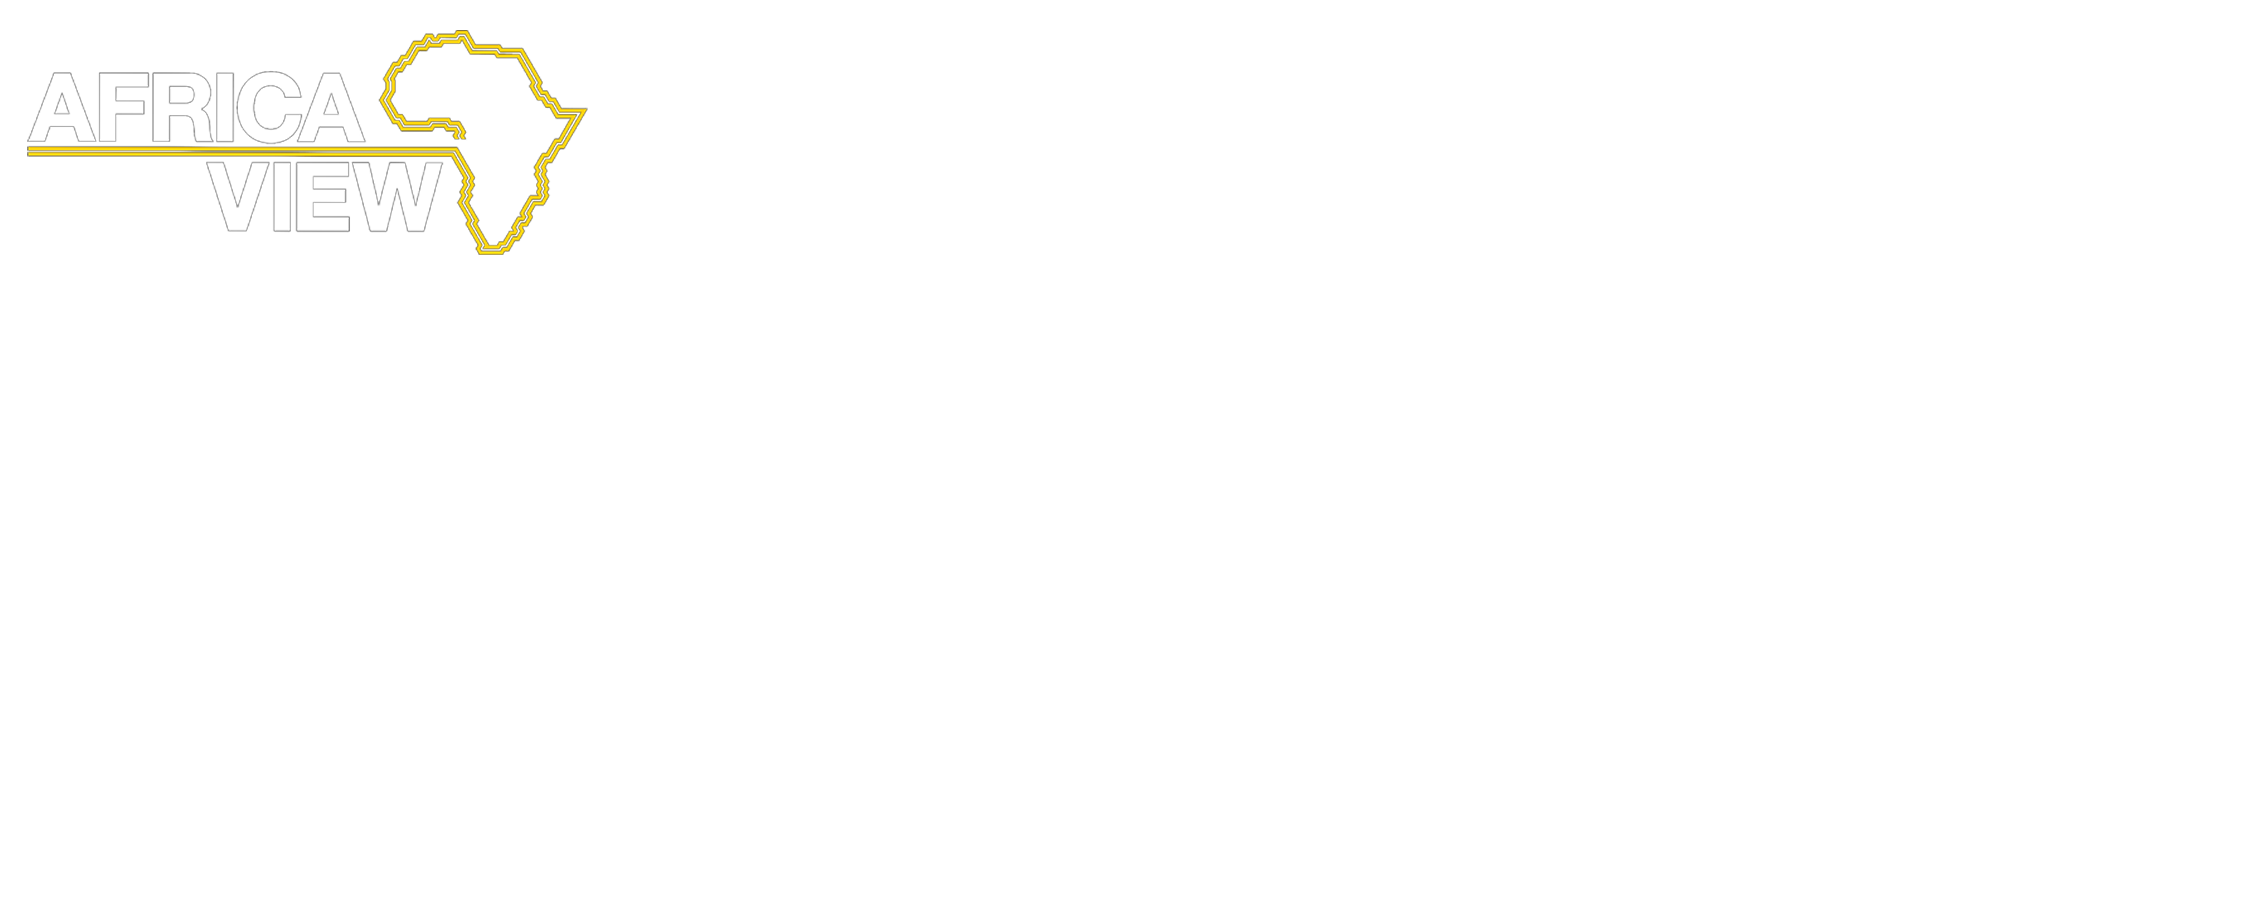 Africa view 5 star reviews